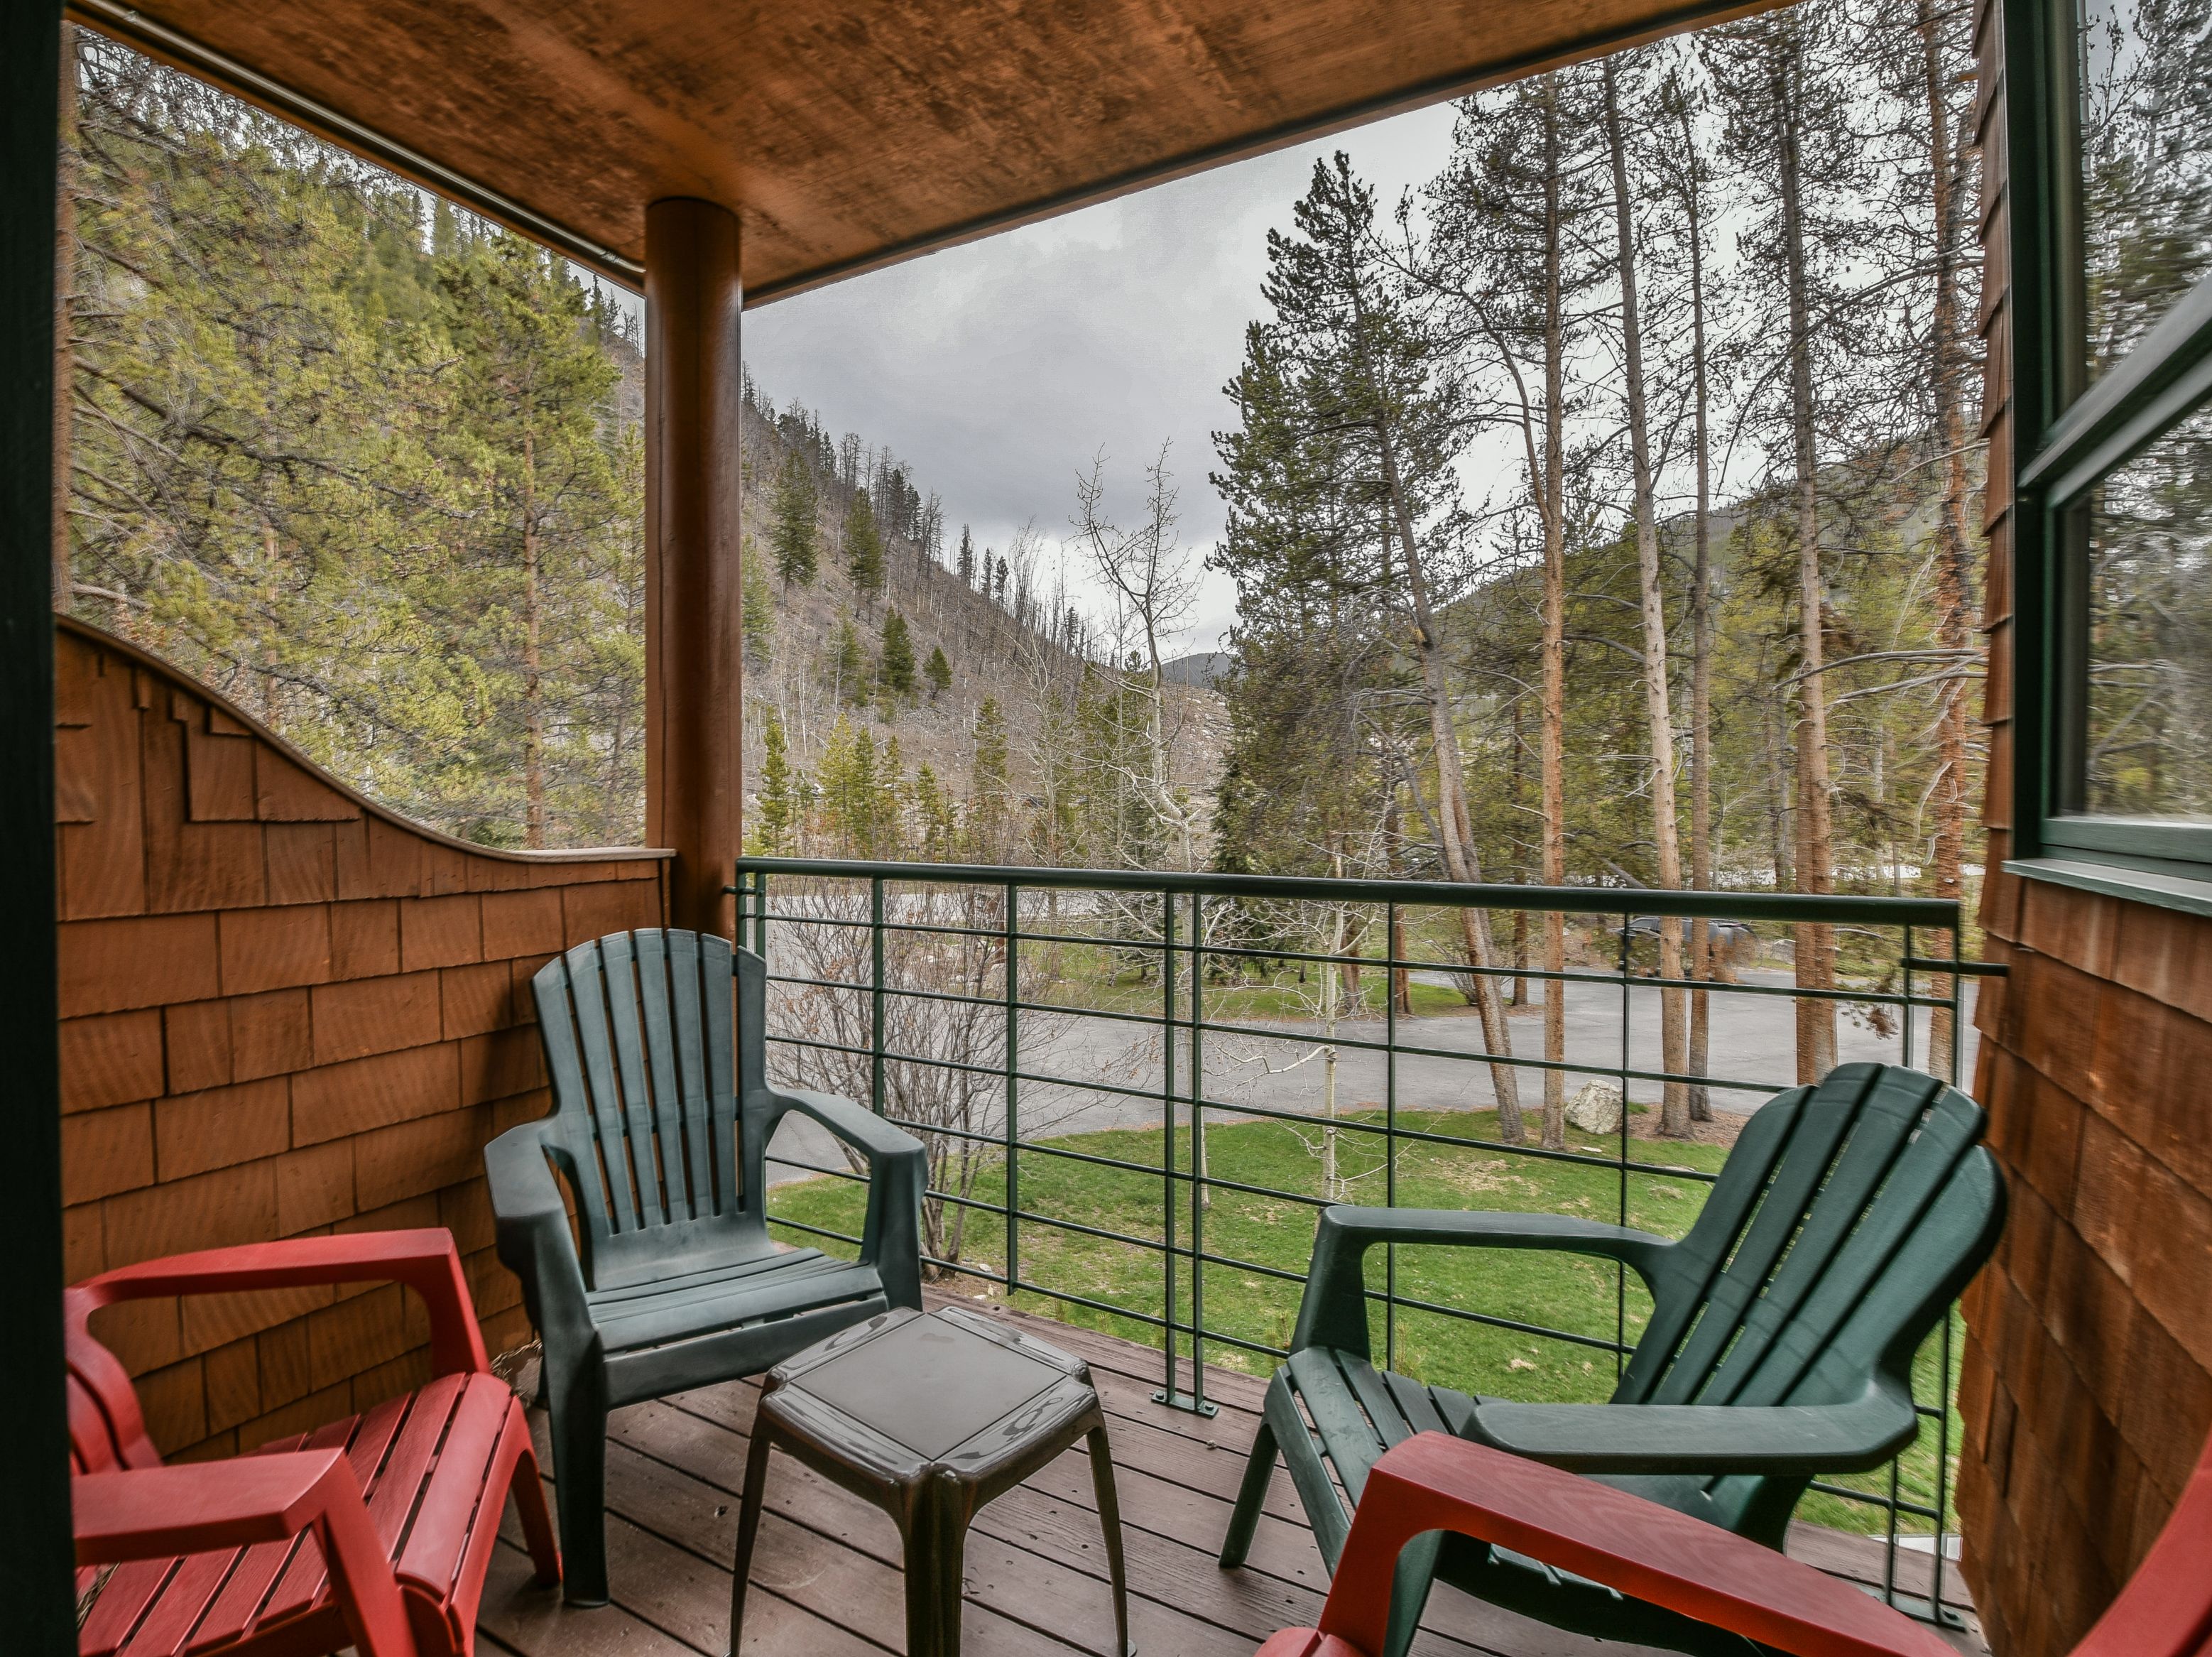 Porch with space to relax and watch the spectacular view